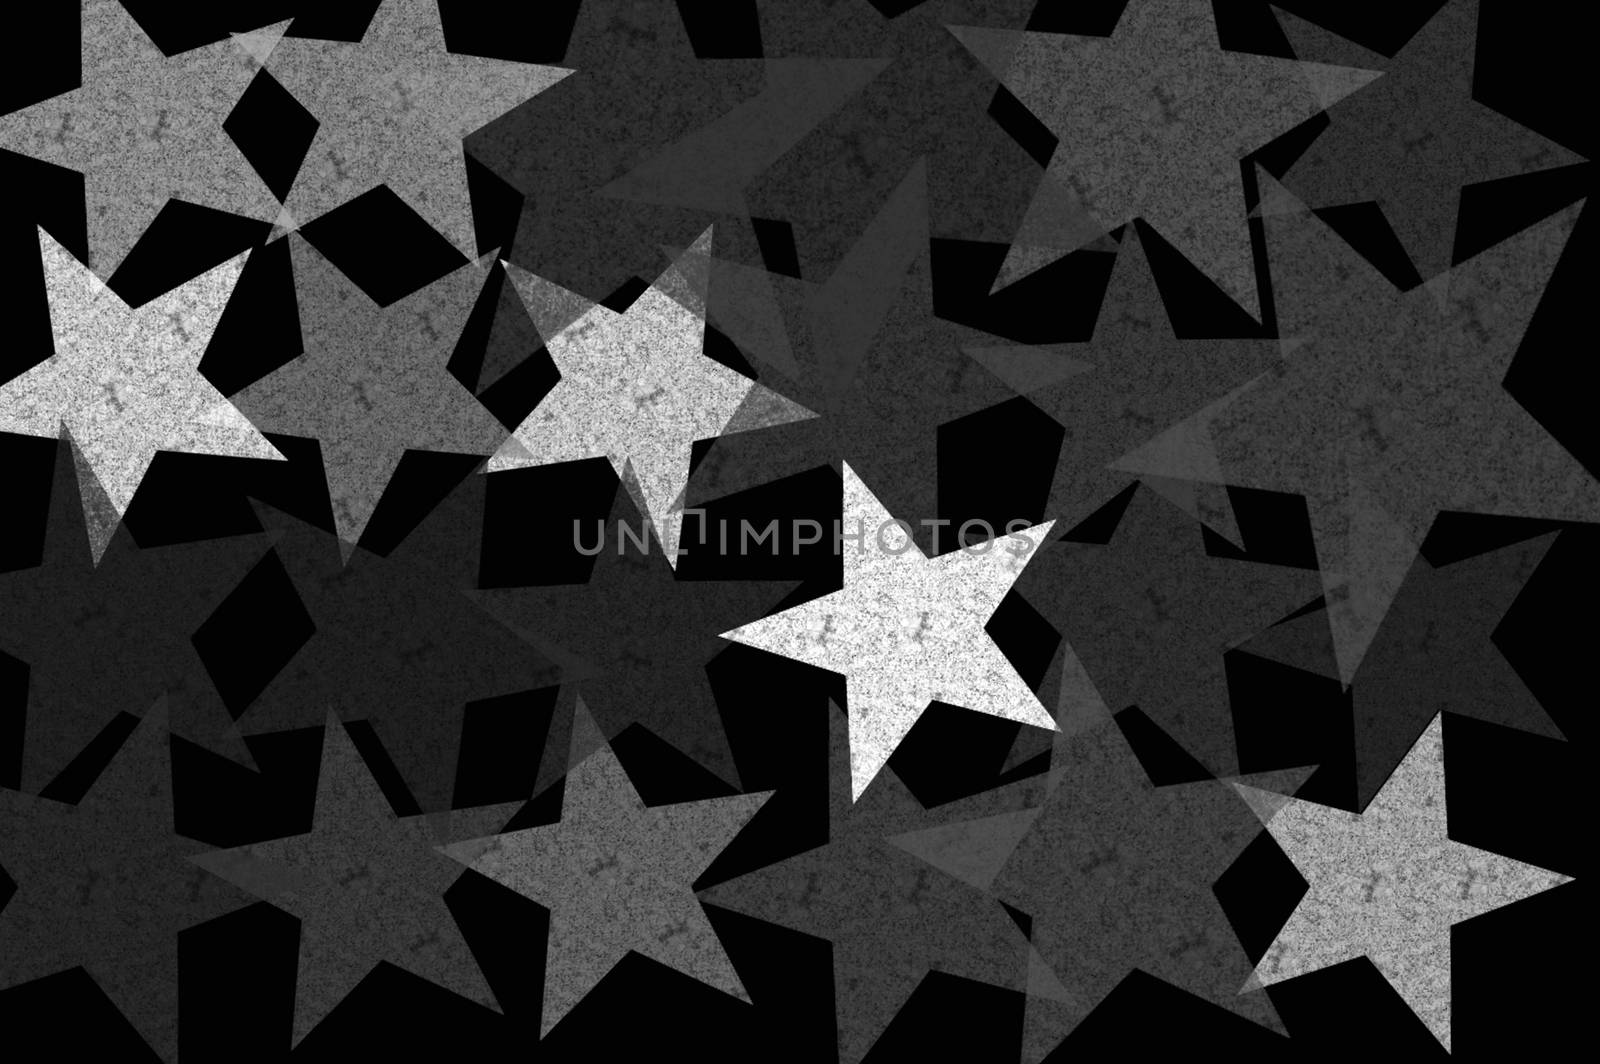 Stars at night grunge pattern abstract background illustration. Black and white.